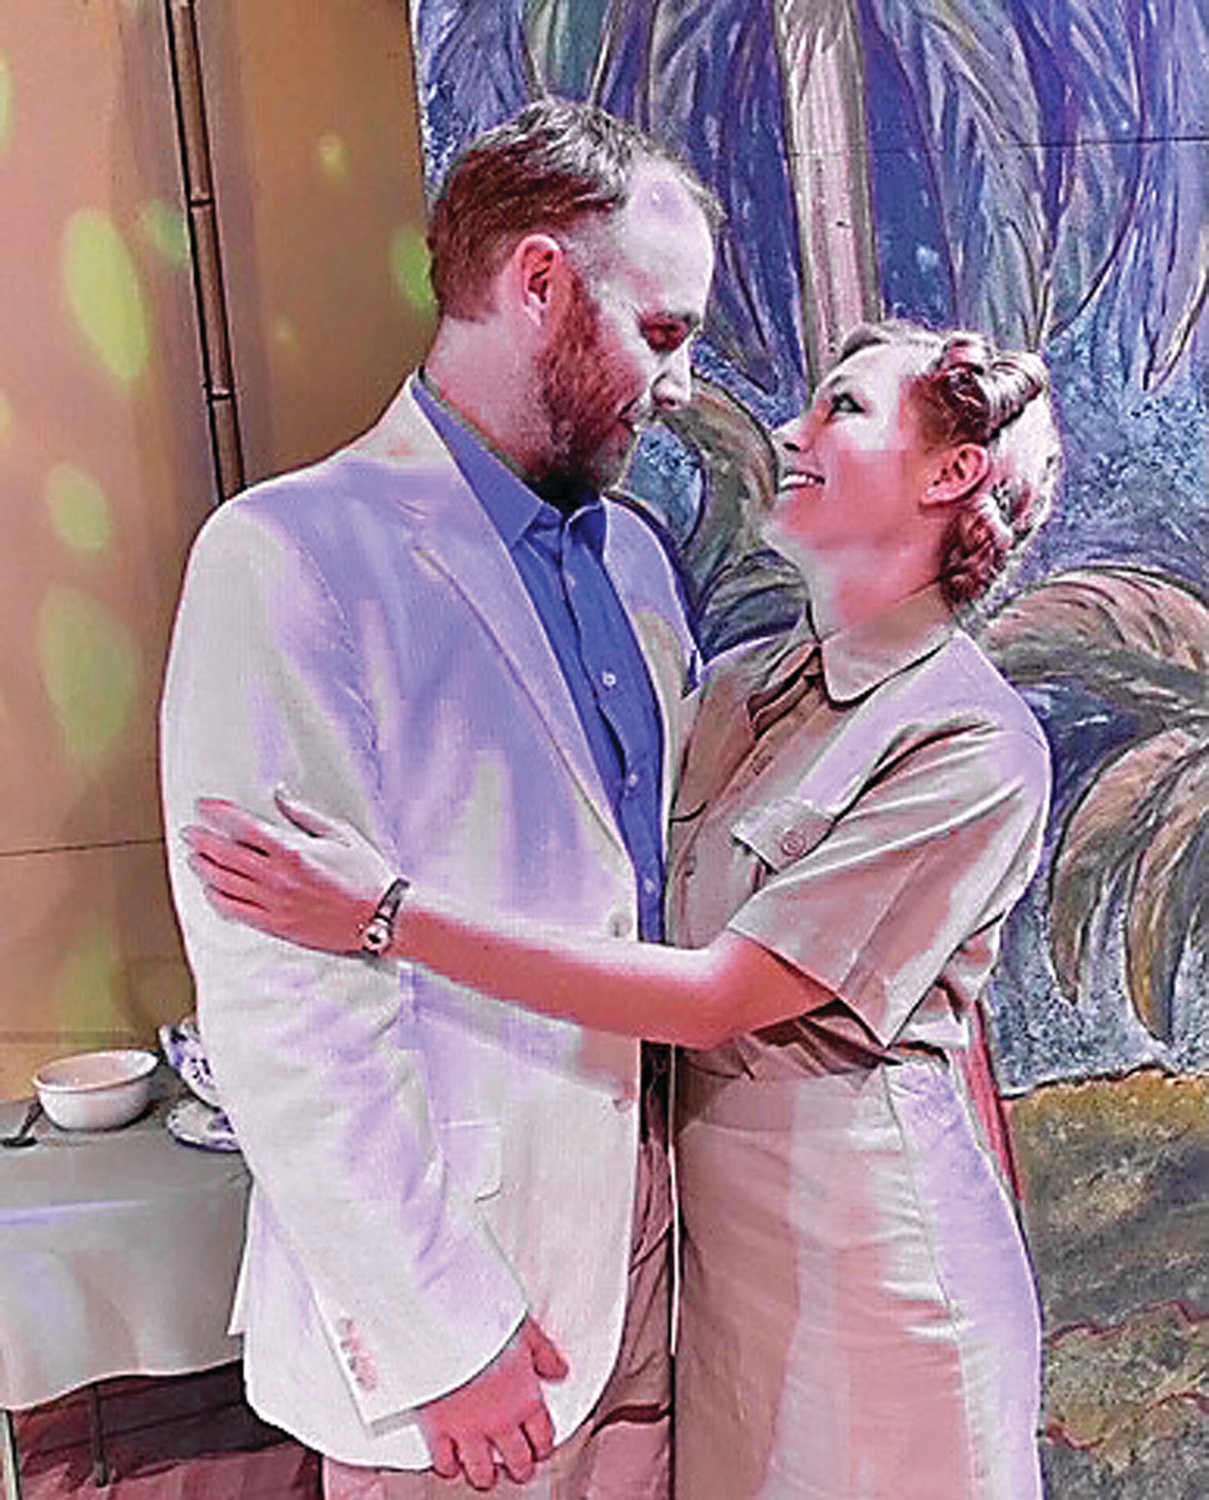 Meredith Beck is Nellie Forbush and Mick Bleyer as  Emile de Becque in the Bucks County Center for Performing Arts production of “South Pacific” running through Aug. 22 at the Delaware Valley University theater.